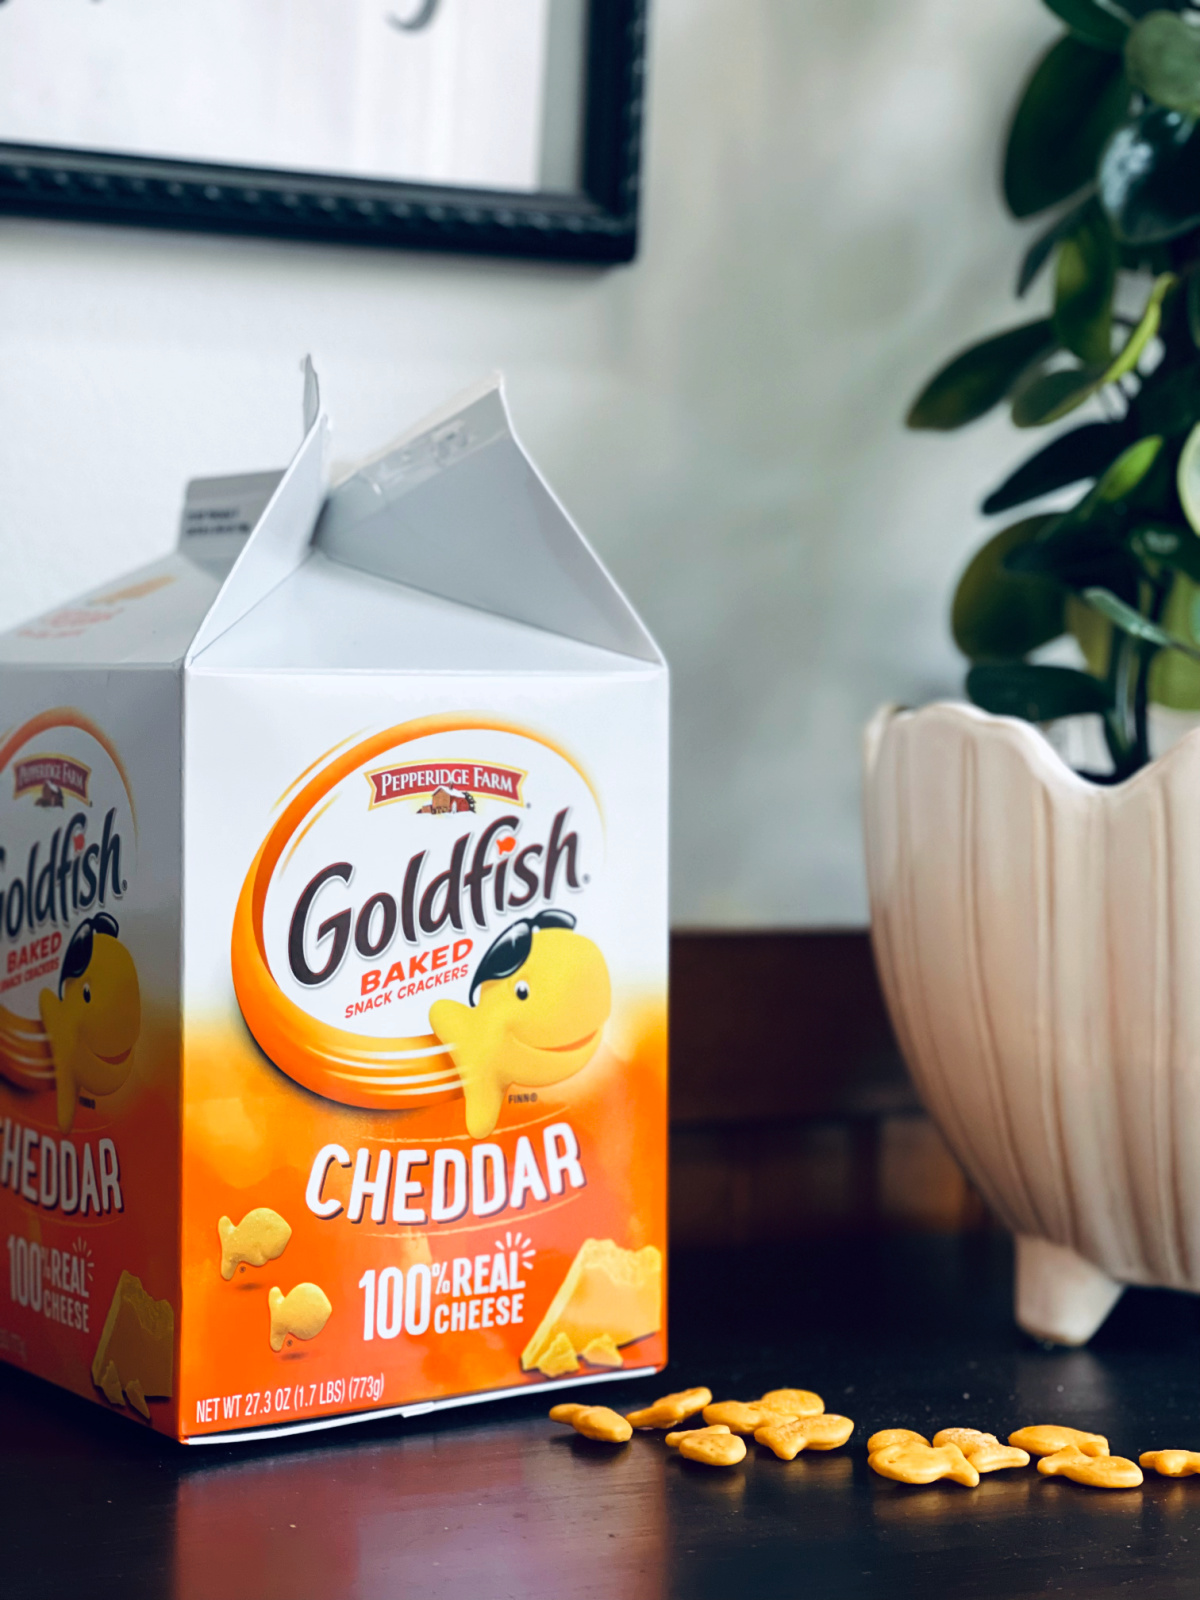 Pepperidge Farm goldfish box with goldfish scattered on table and plant in background.